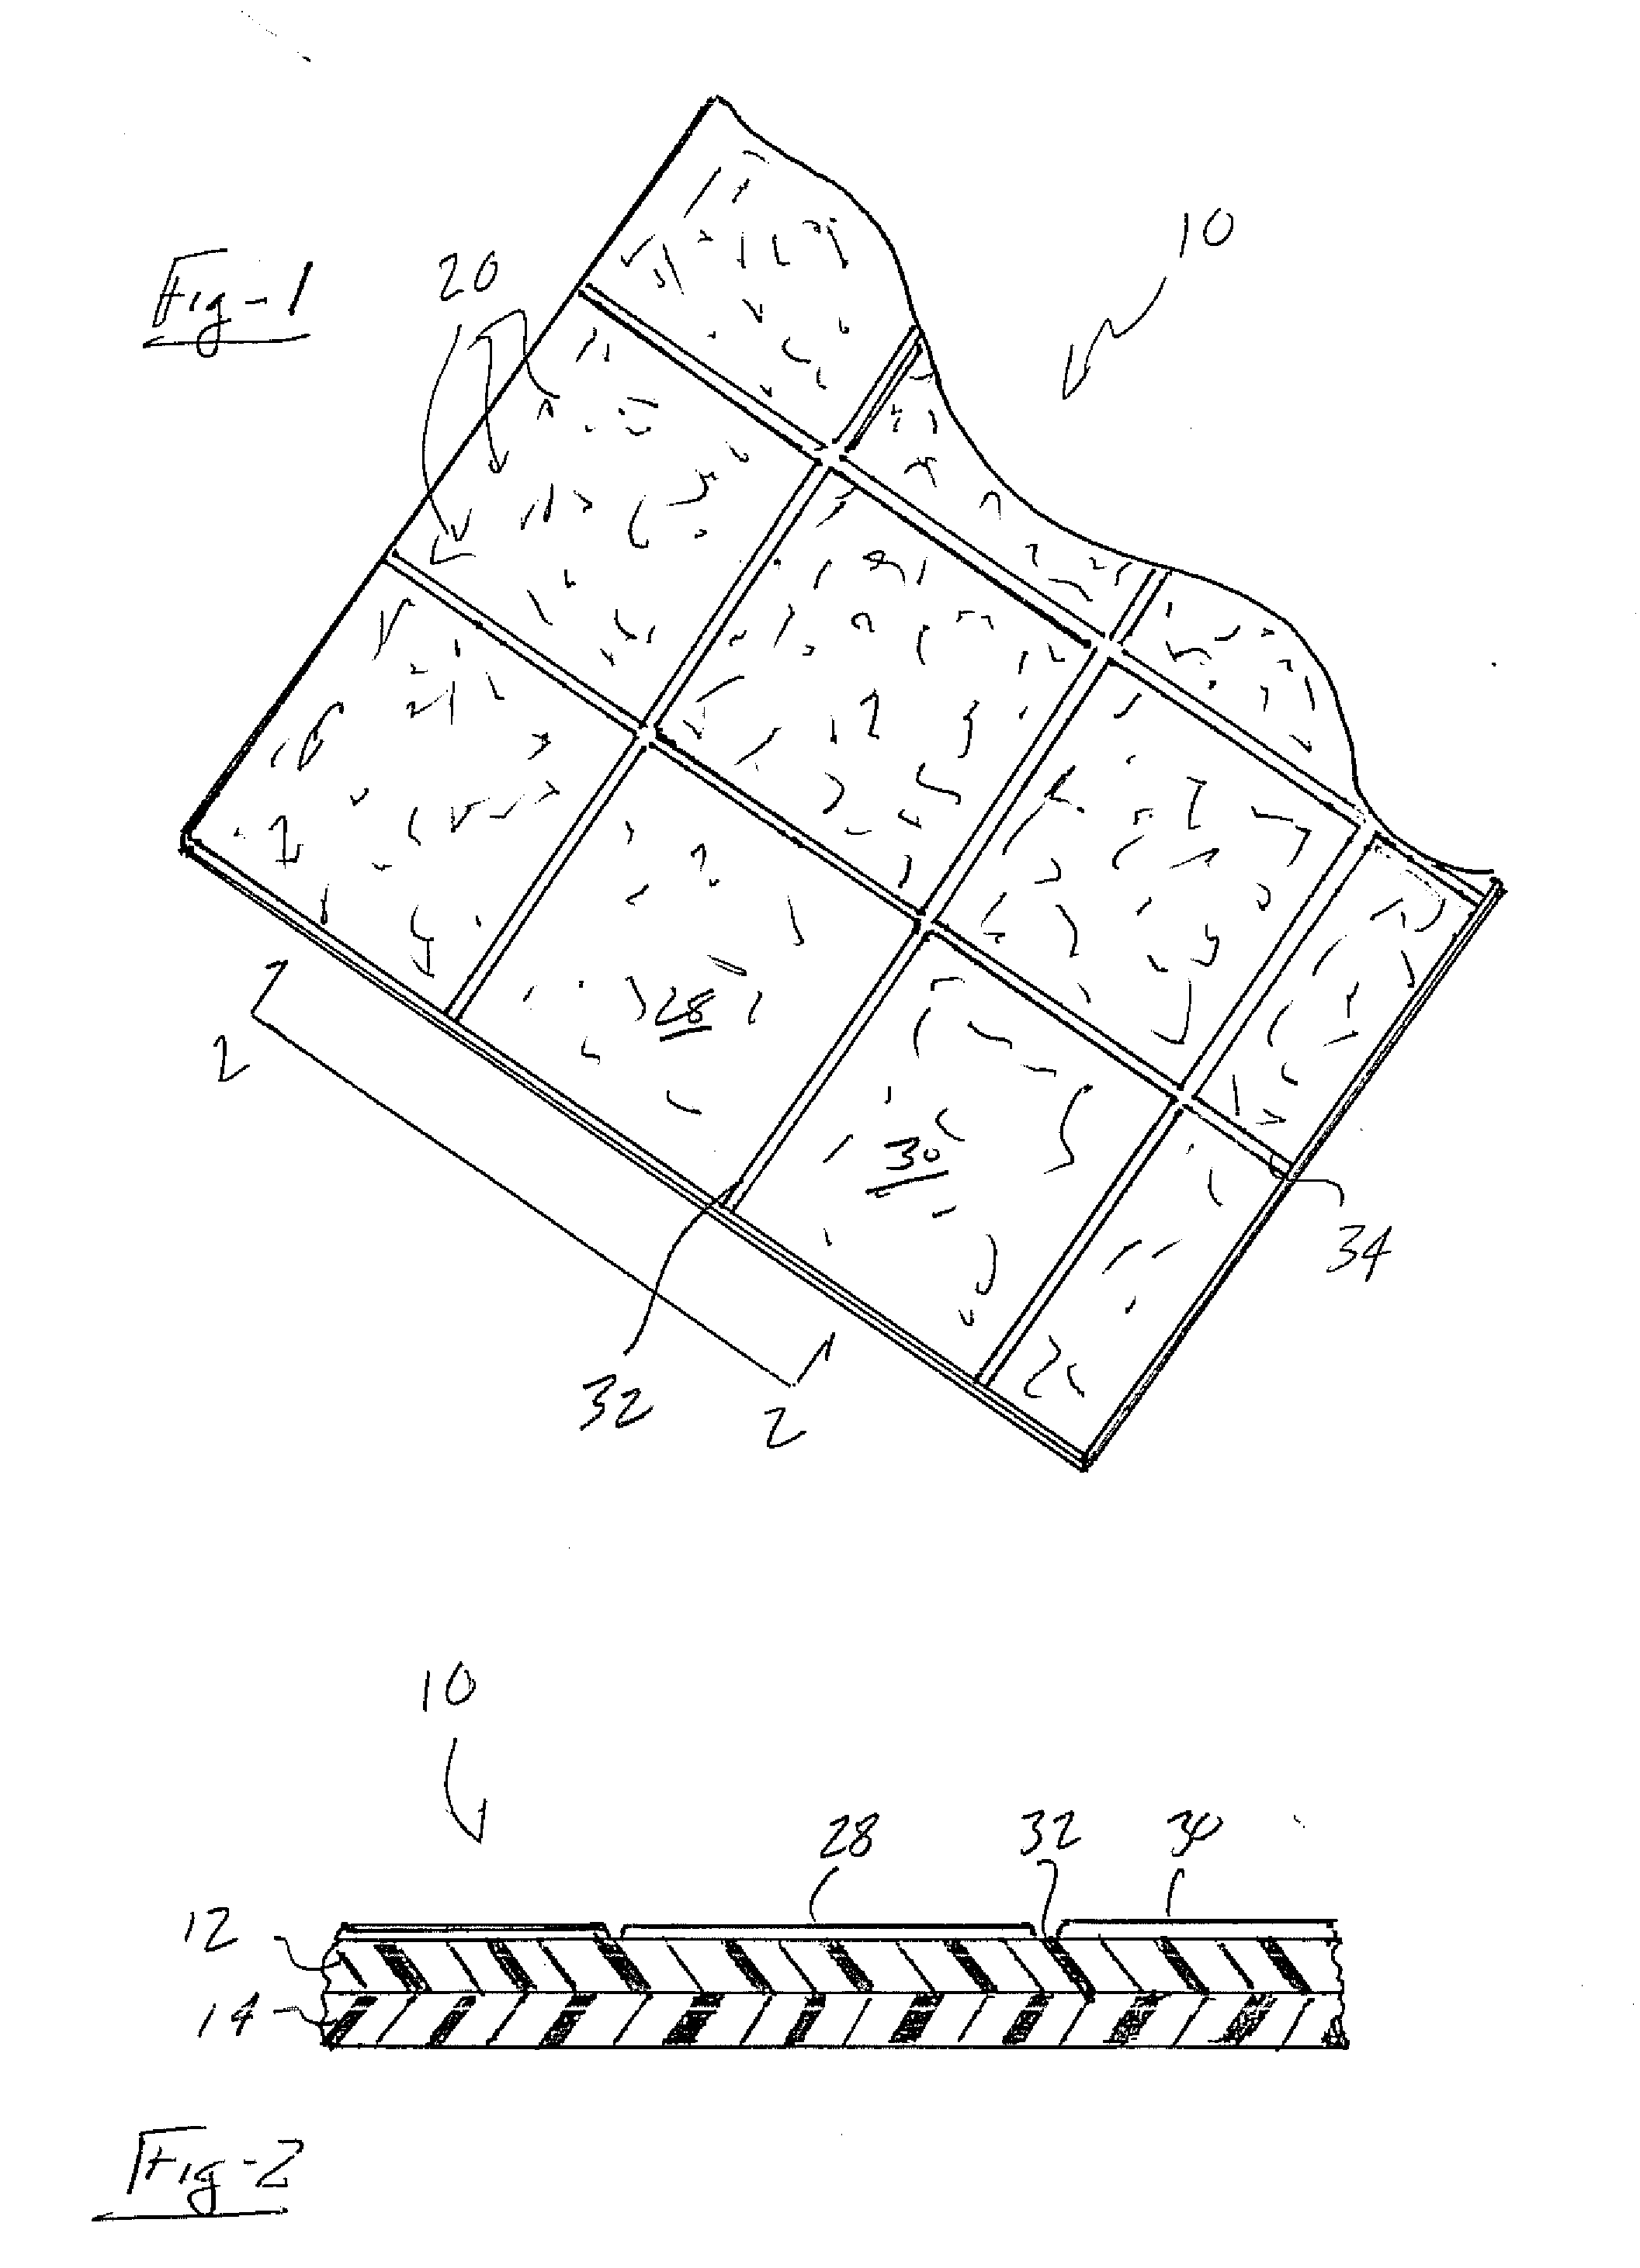 Plastic resin based composite tile board article and associated method for creating through routing and/or embossing of a substantially upper most layer thereof in order to create a decorative pattern